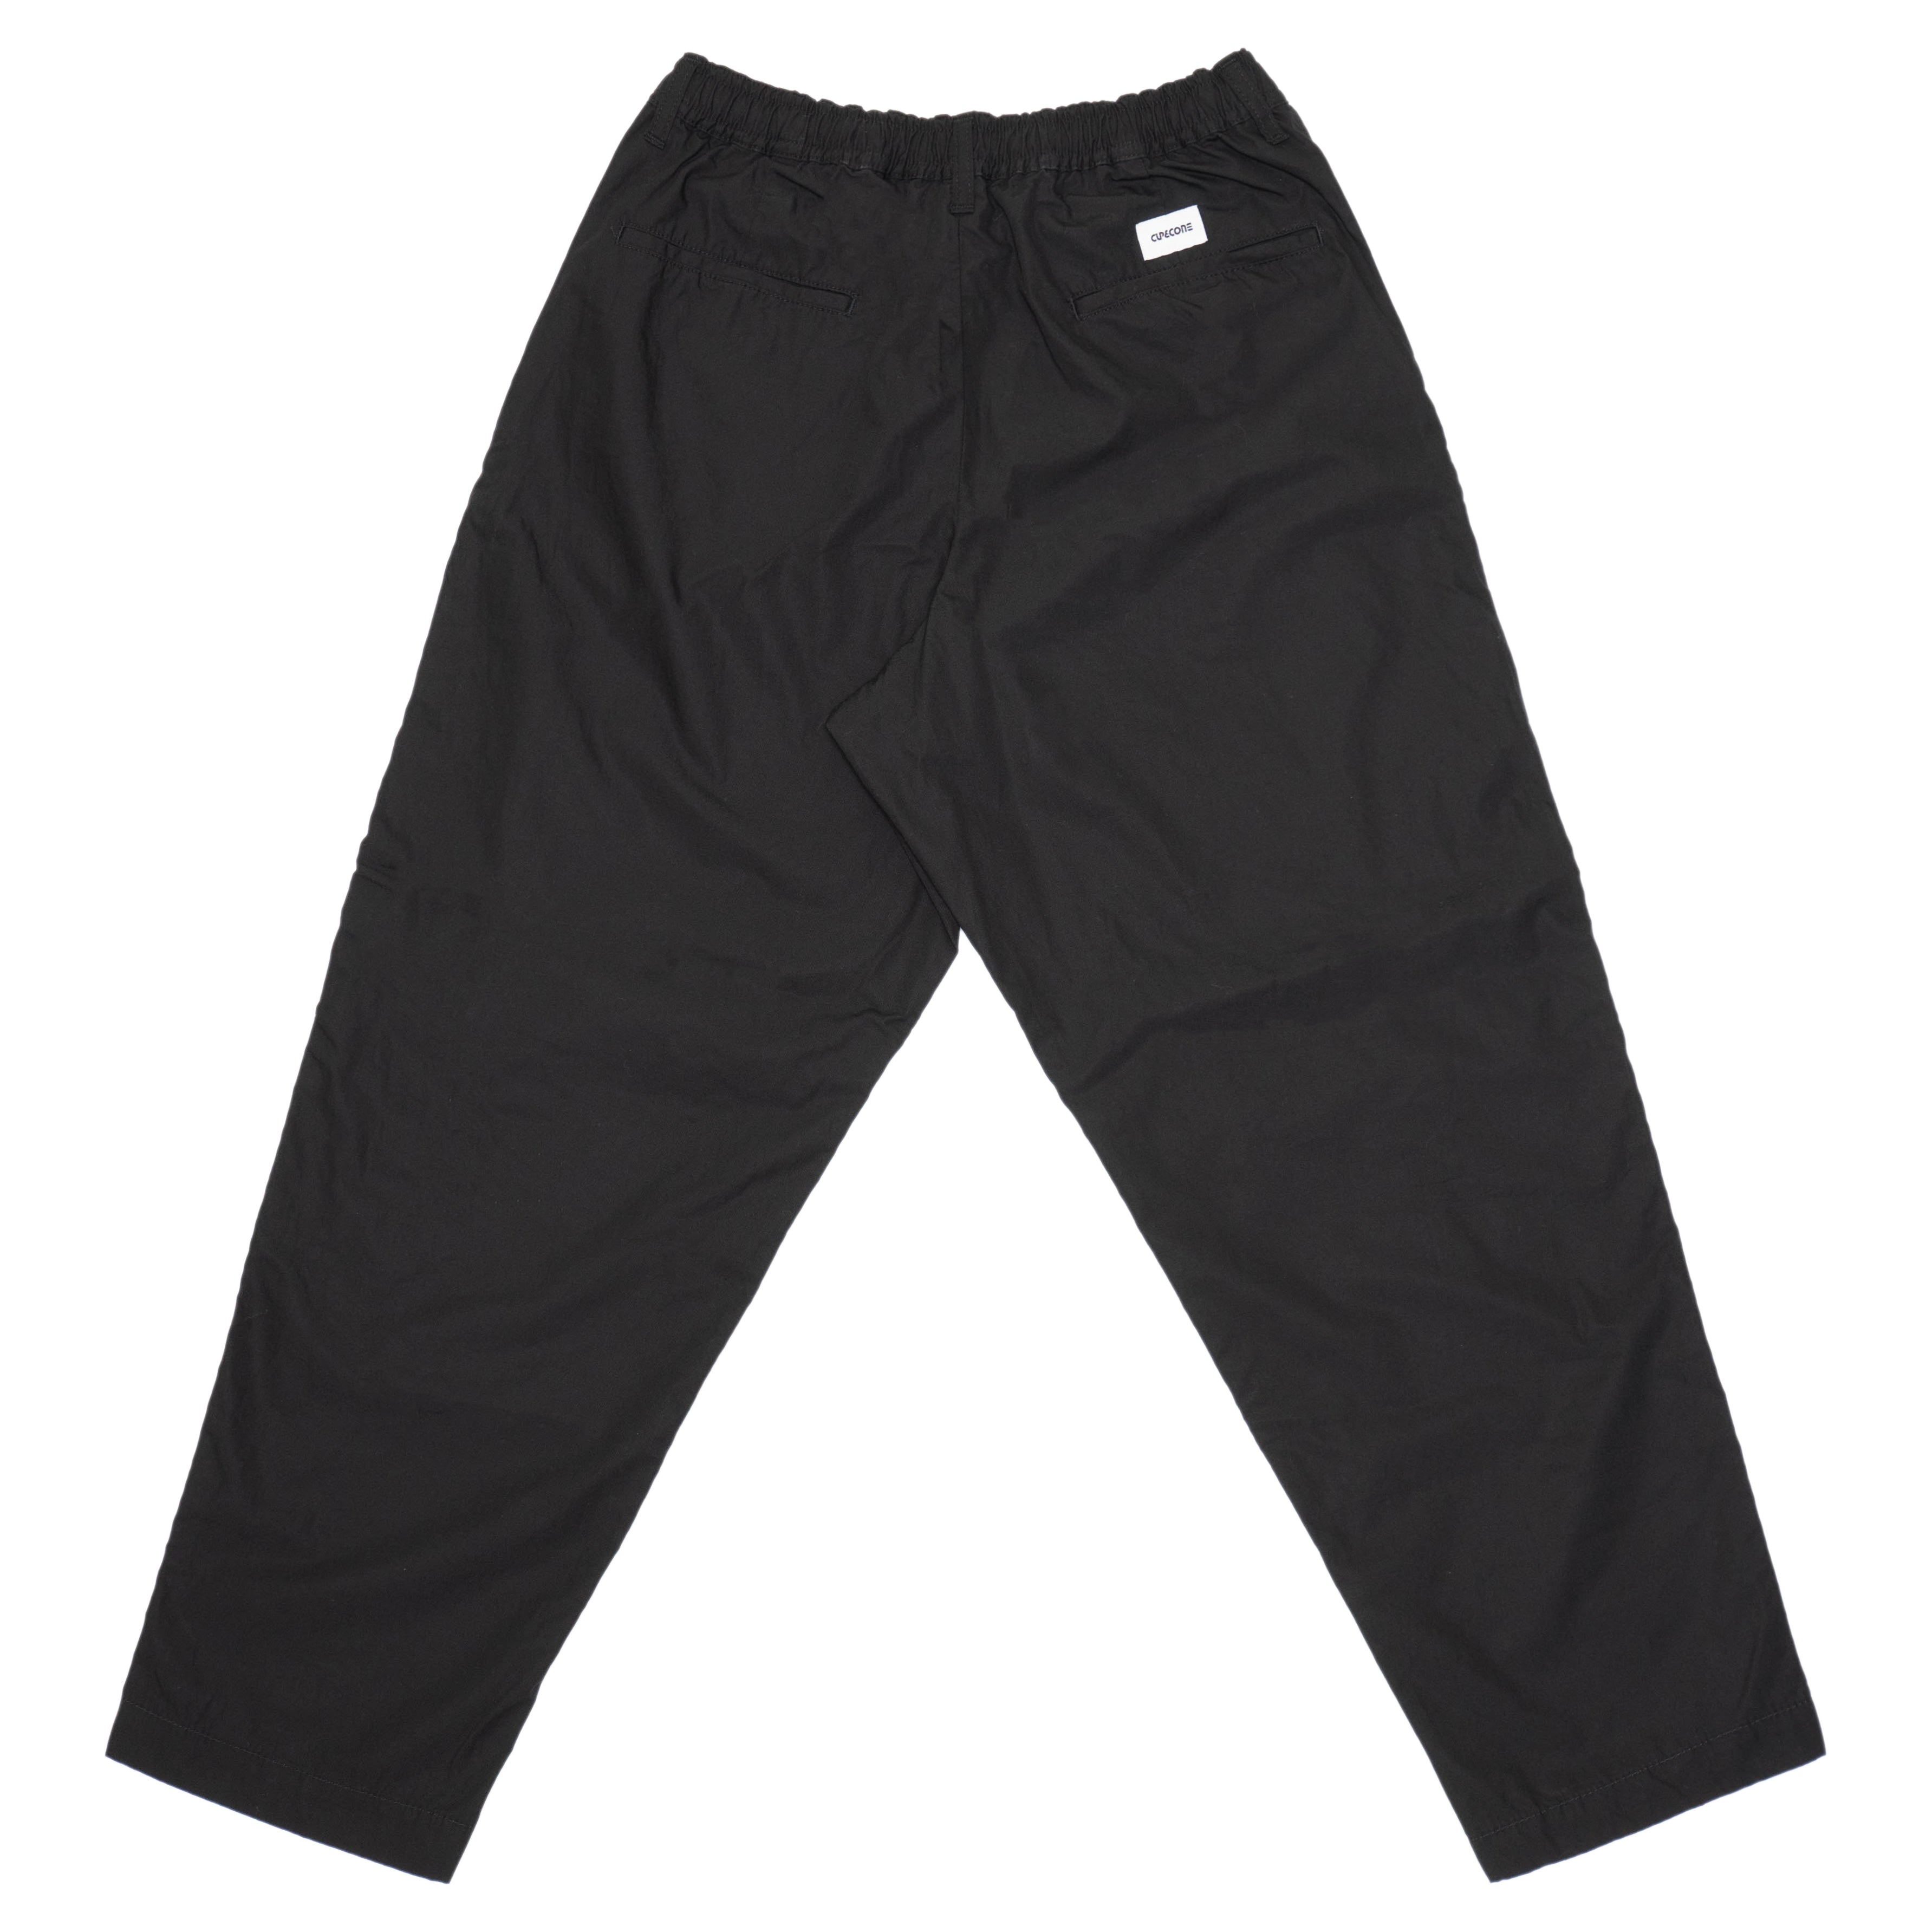 Light Cotton Easy Pants - Black – CUP AND CONE